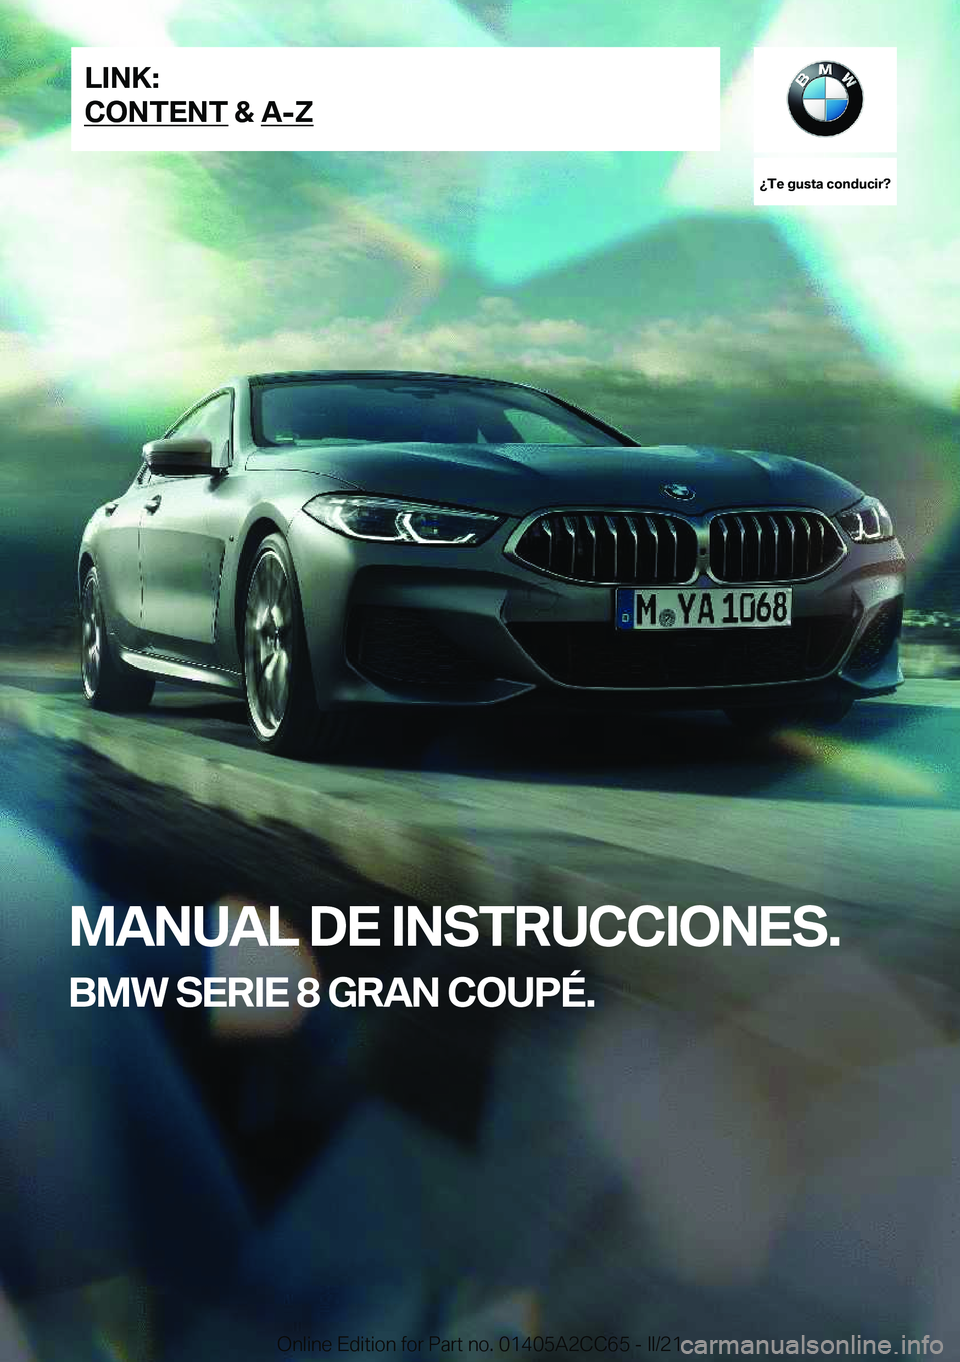 BMW 8 SERIES GRAN COUPE 2022  Manuales de Empleo (in Spanish) ��T�e��g�u�s�t�a��c�o�n�d�u�c�i�r� 
�M�A�N�U�A�L��D�E��I�N�S�T�R�U�C�C�I�O�N�E�S�.
�B�M�W��S�E�R�I�E��8��G�R�A�N��C�O�U�P�